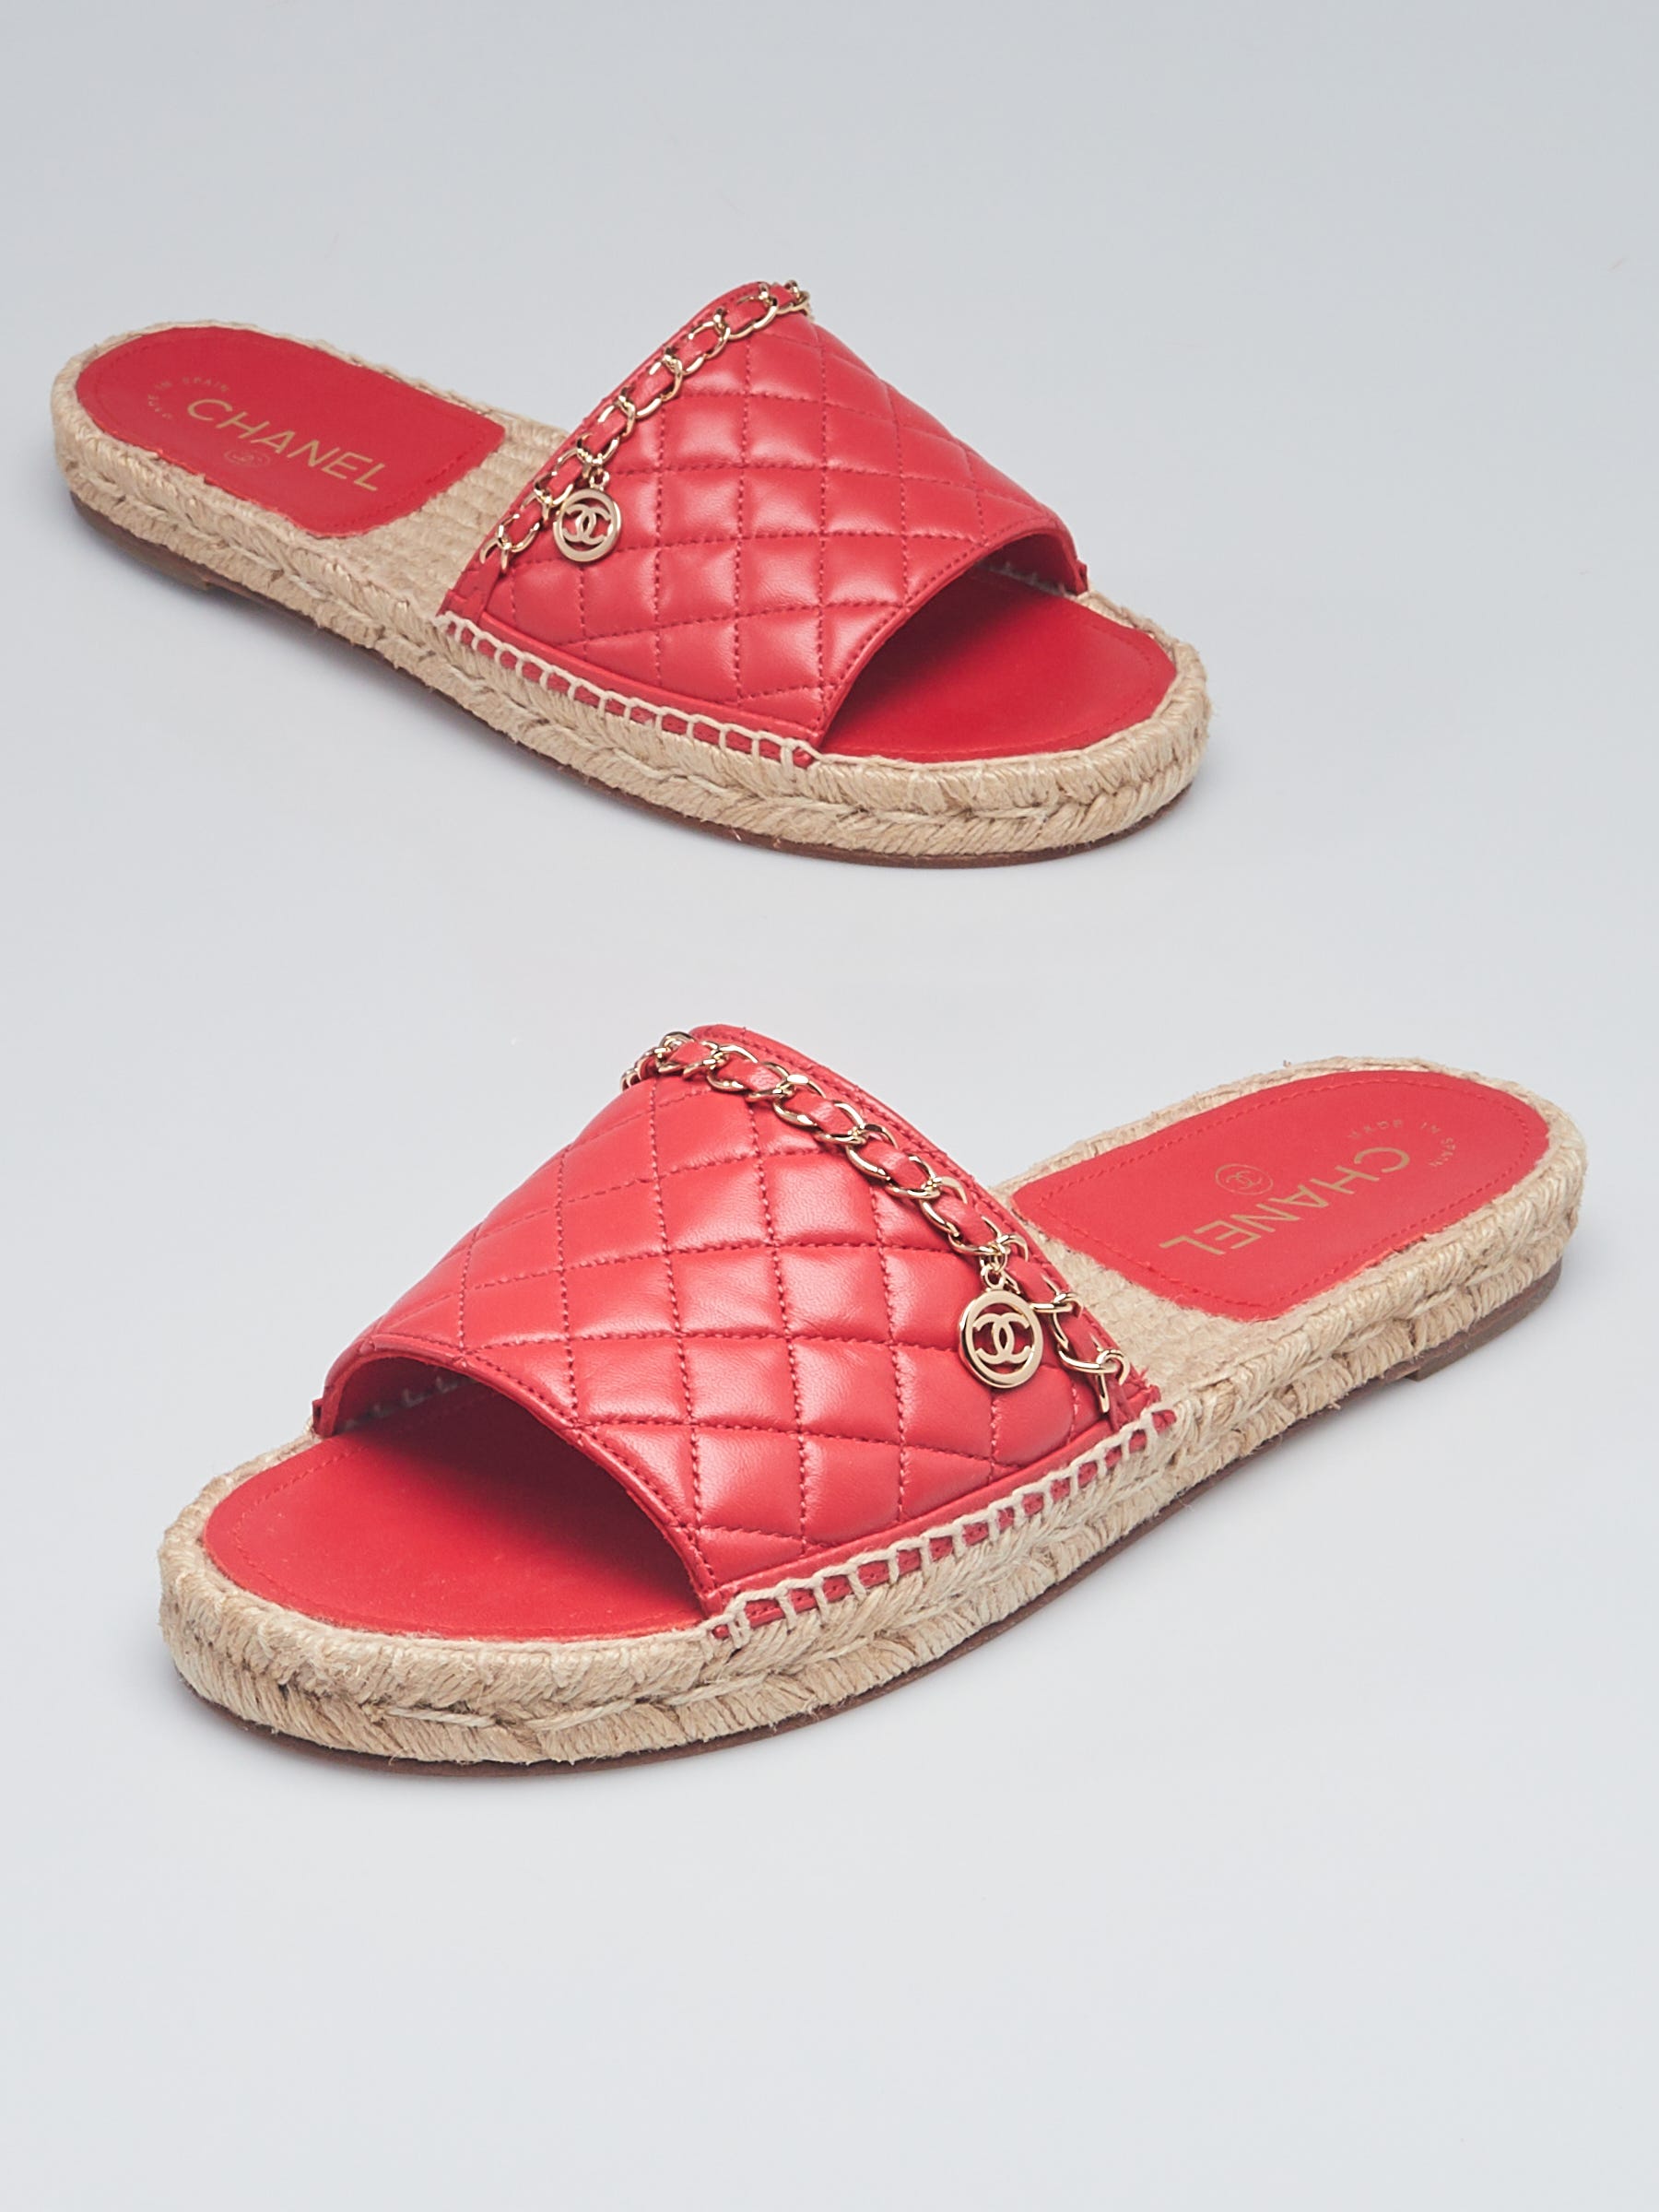 Chanel Red Quilted Lambskin Leather Chain Espadrille Flat Sandals